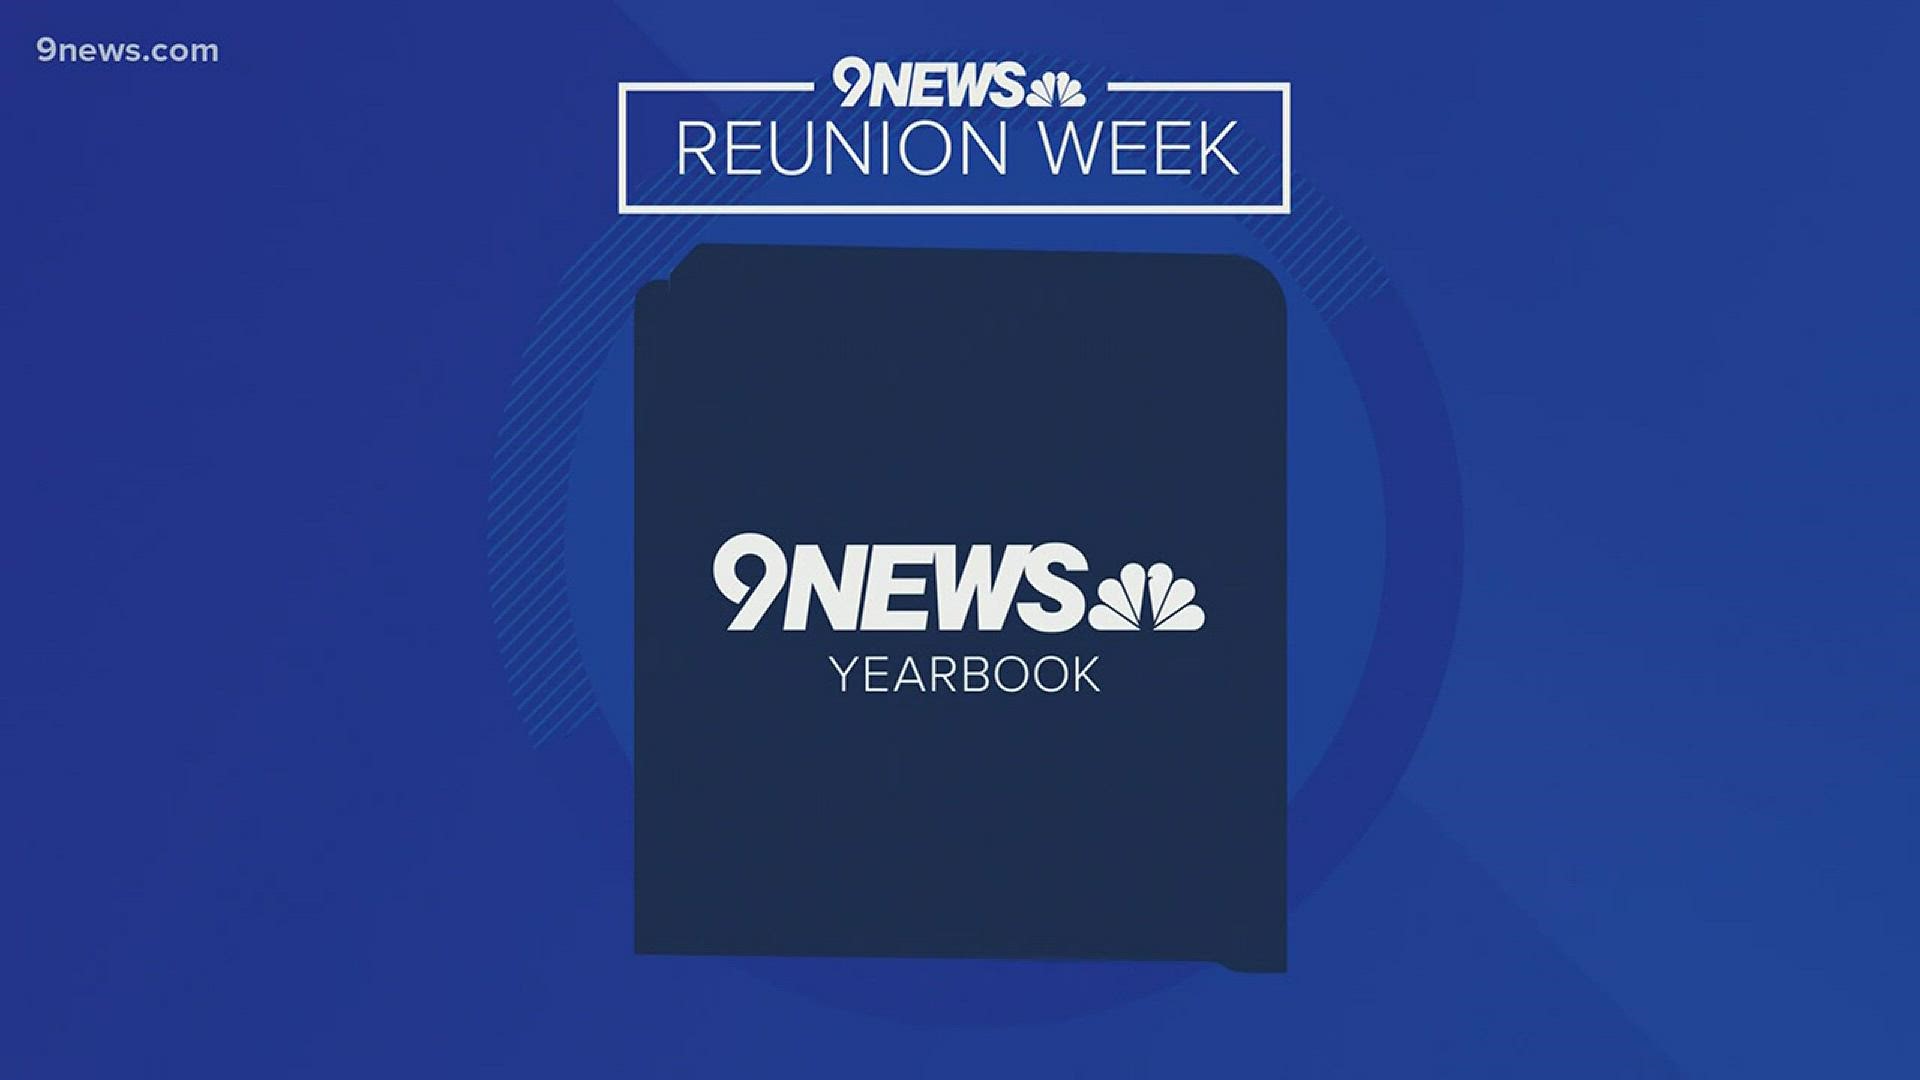 It's Reunion Week at 9NEWS! Mark Koebrich talks about his life in semi-retirement and his career in broadcasting.